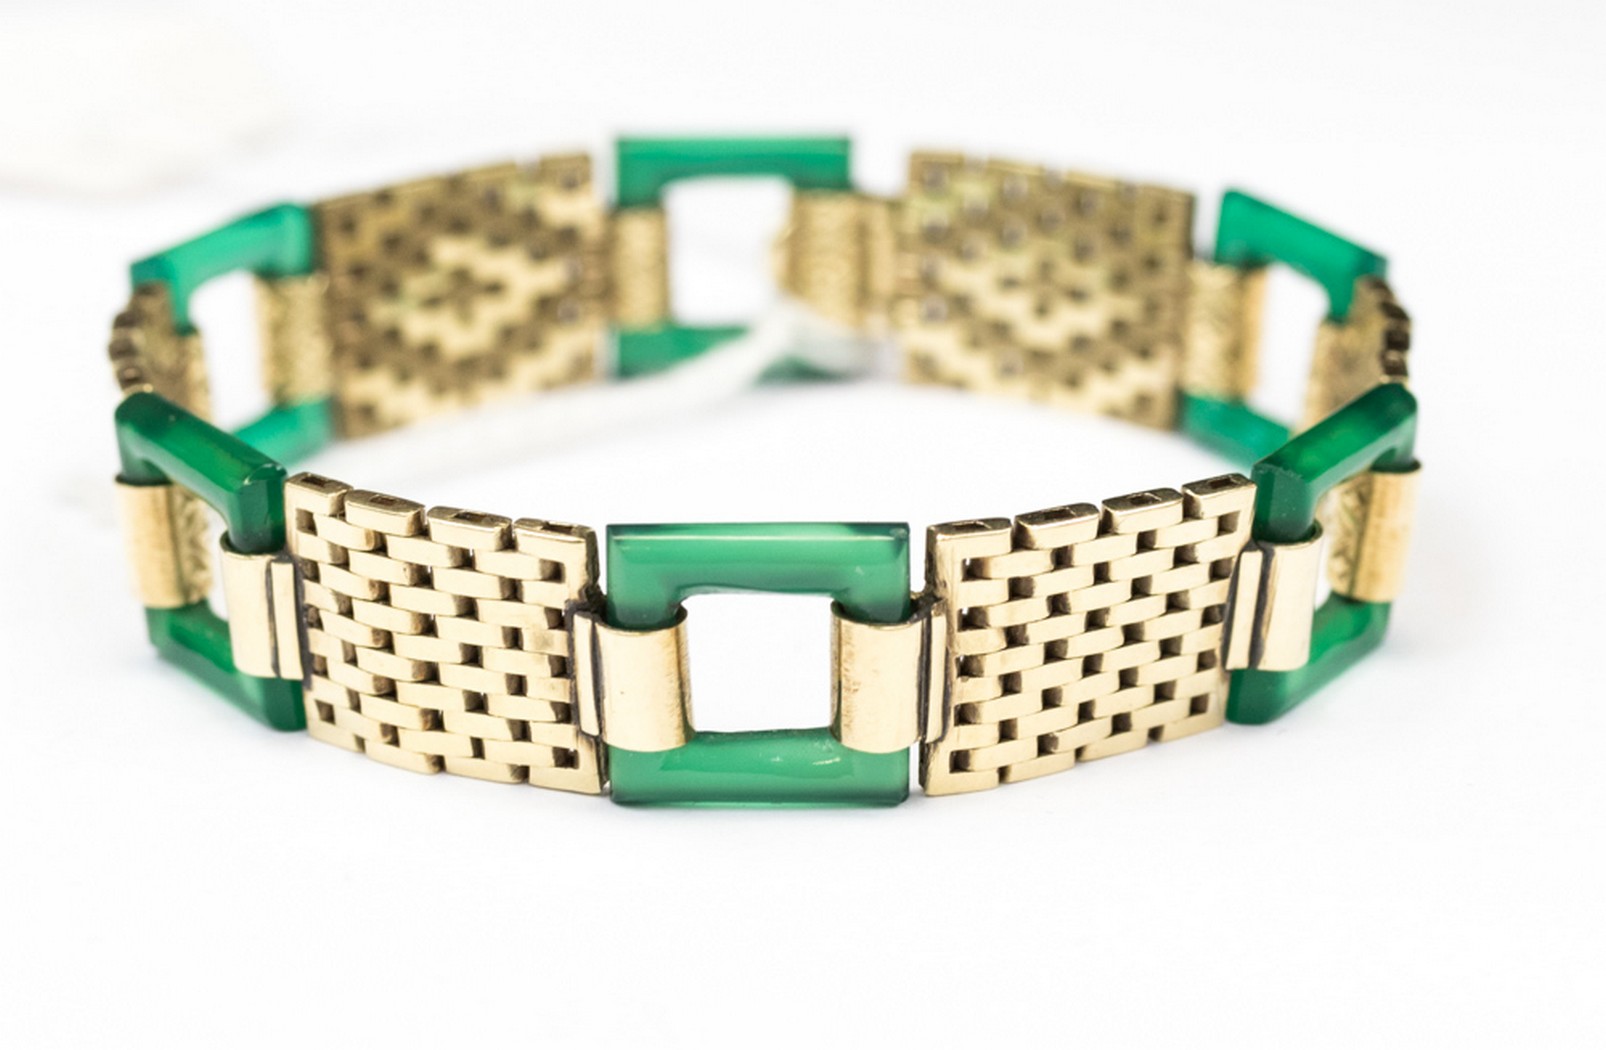 A yellow metal brick link bracelet with alternate green square cut out links,